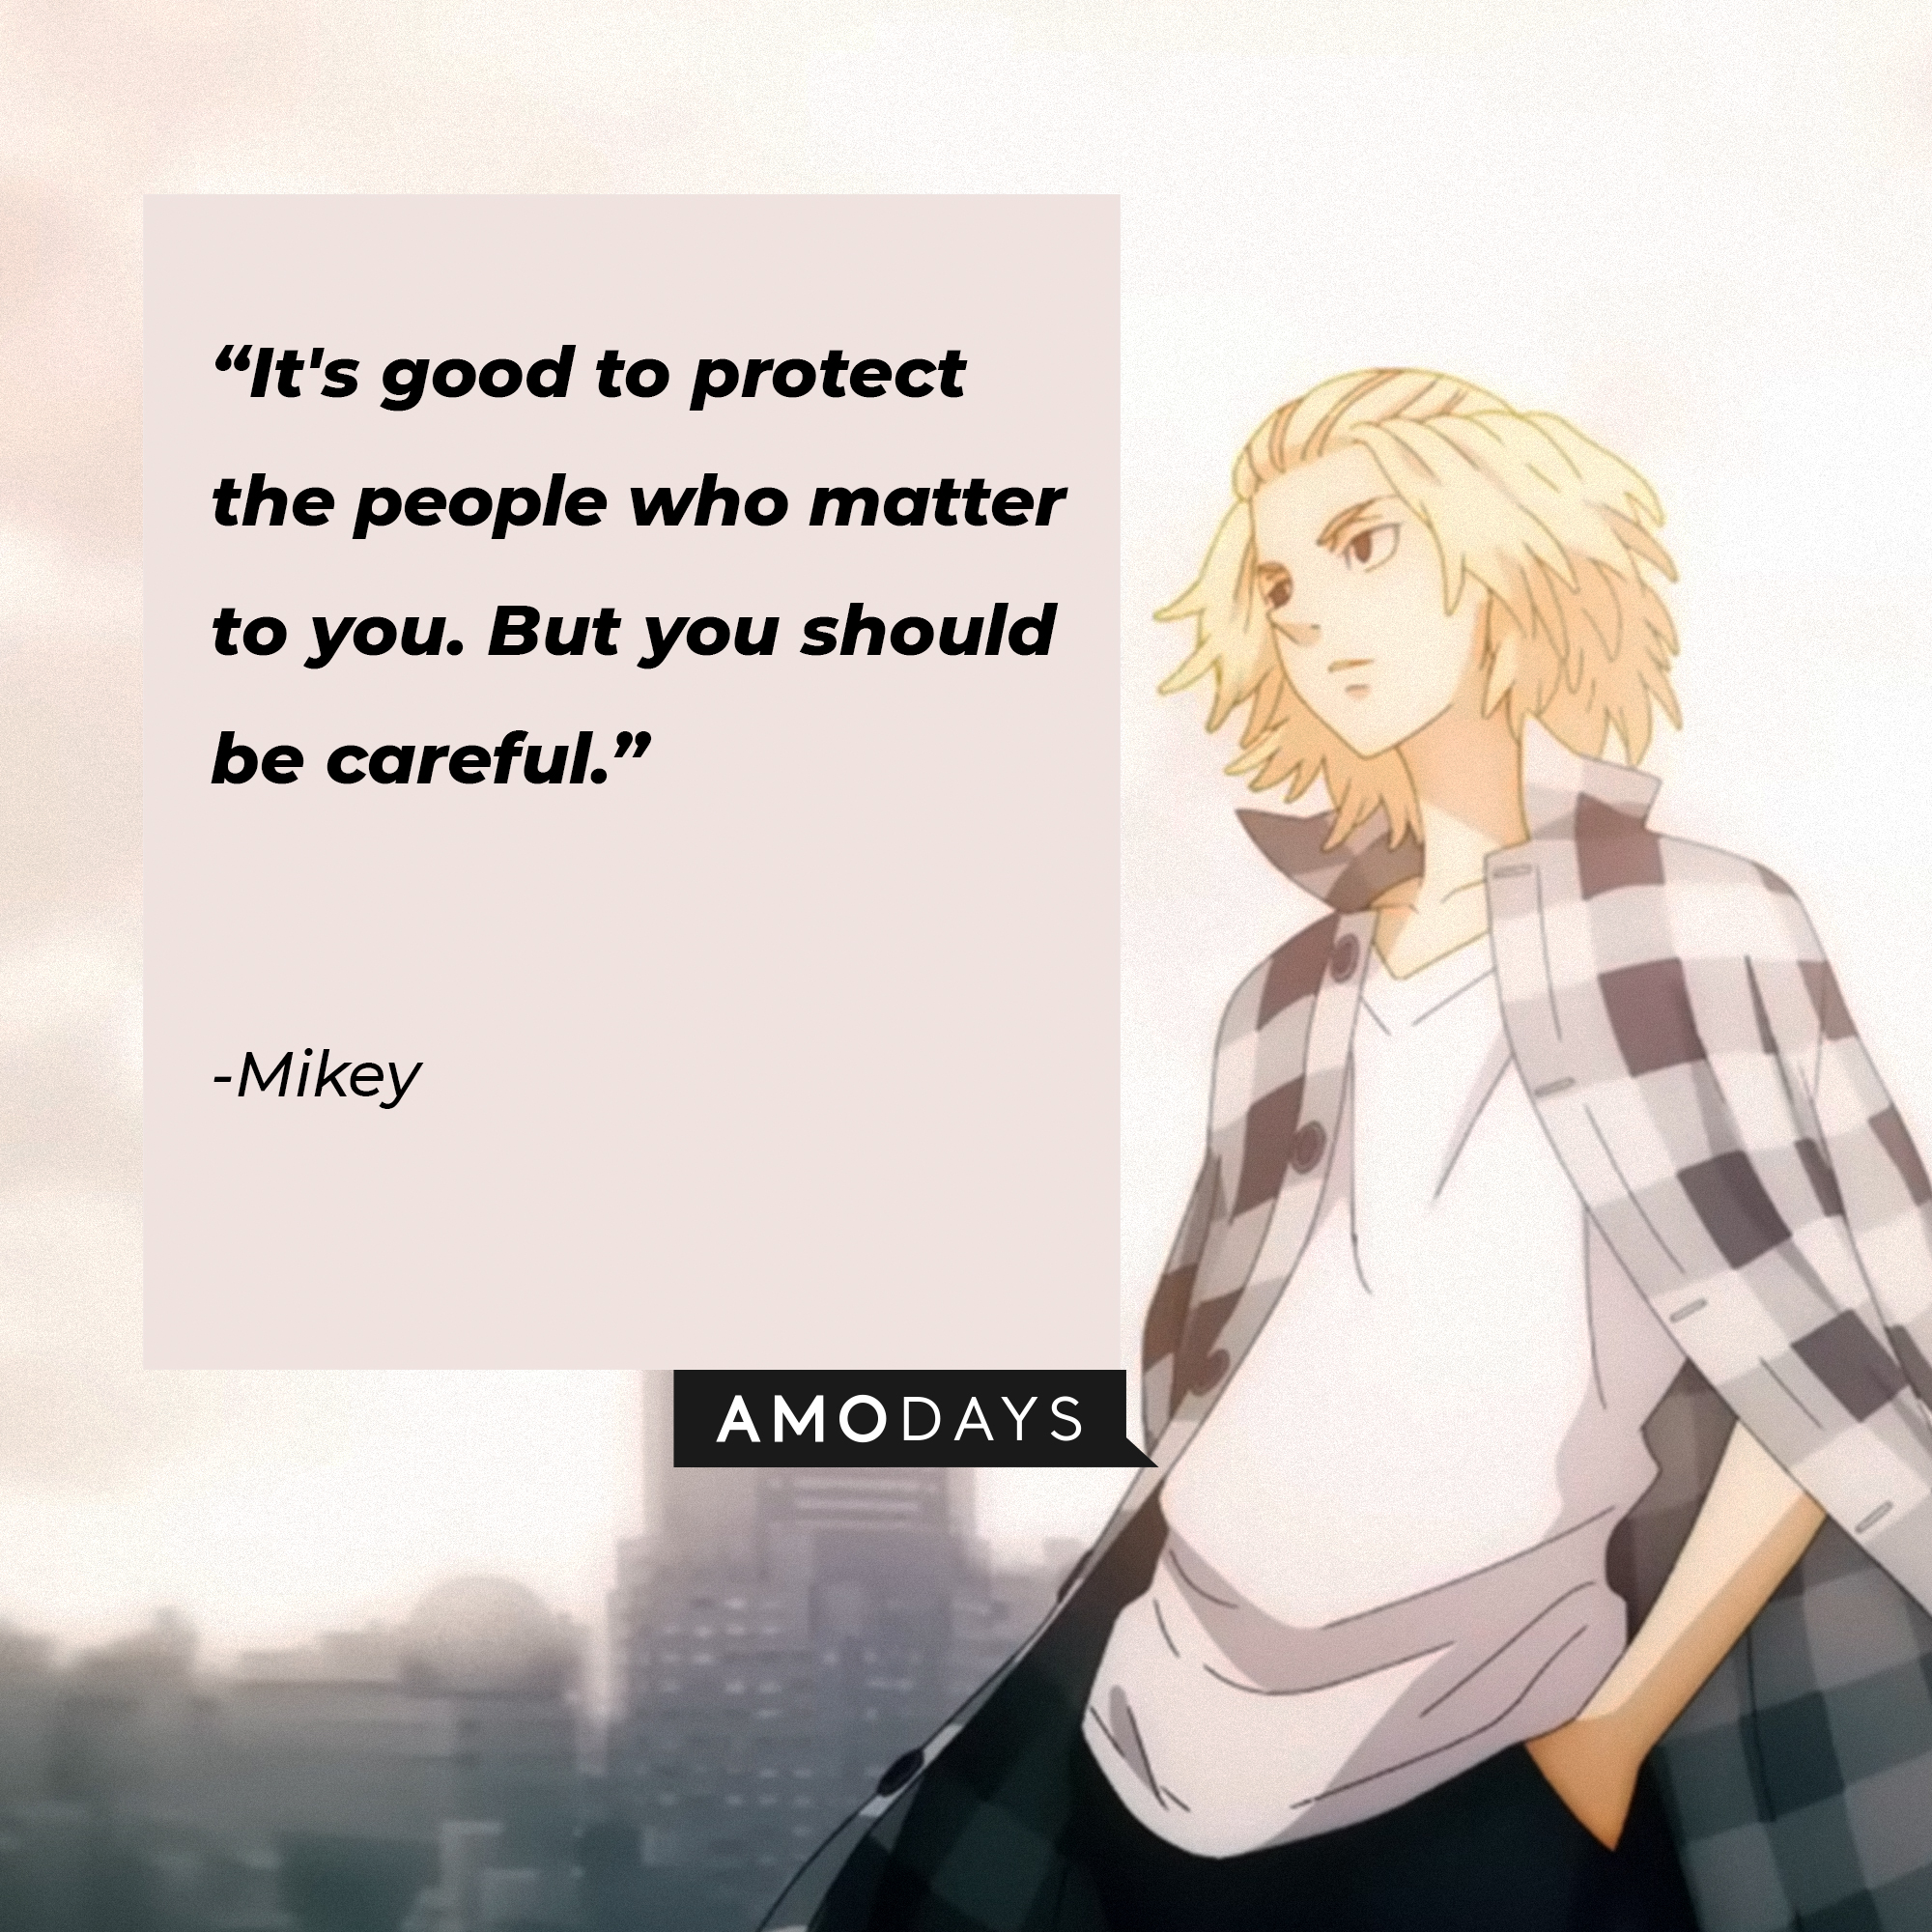 Mikey's quote: "It's good to protect the people who matter to you. But you should be careful." | Source: Youtube.com/Crunchyroll Collection